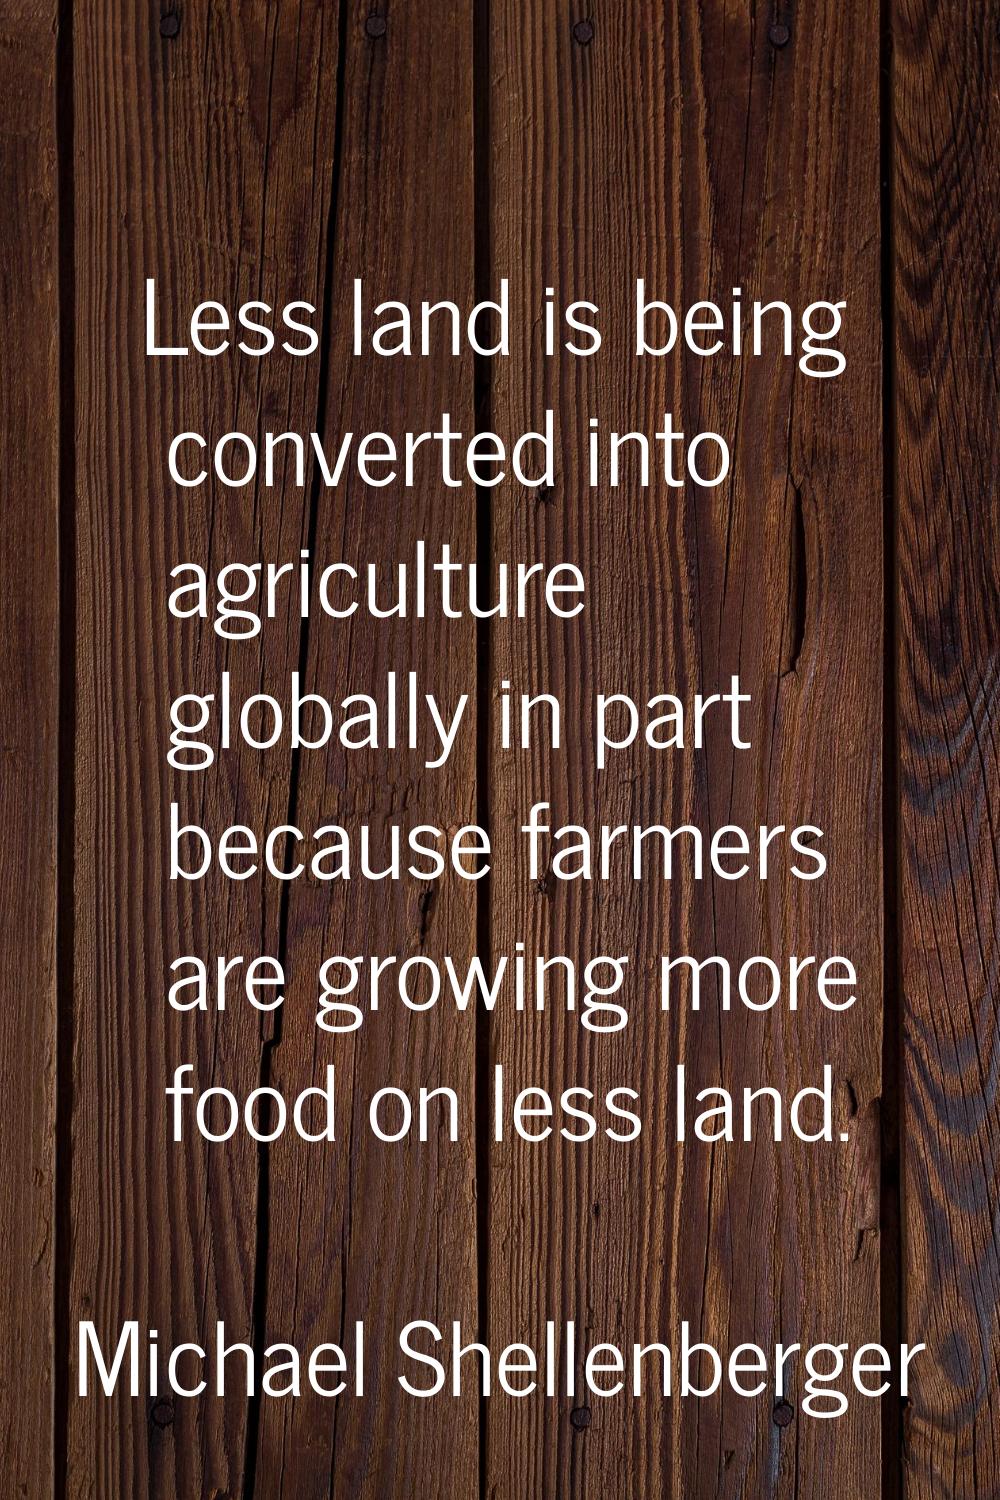 Less land is being converted into agriculture globally in part because farmers are growing more foo